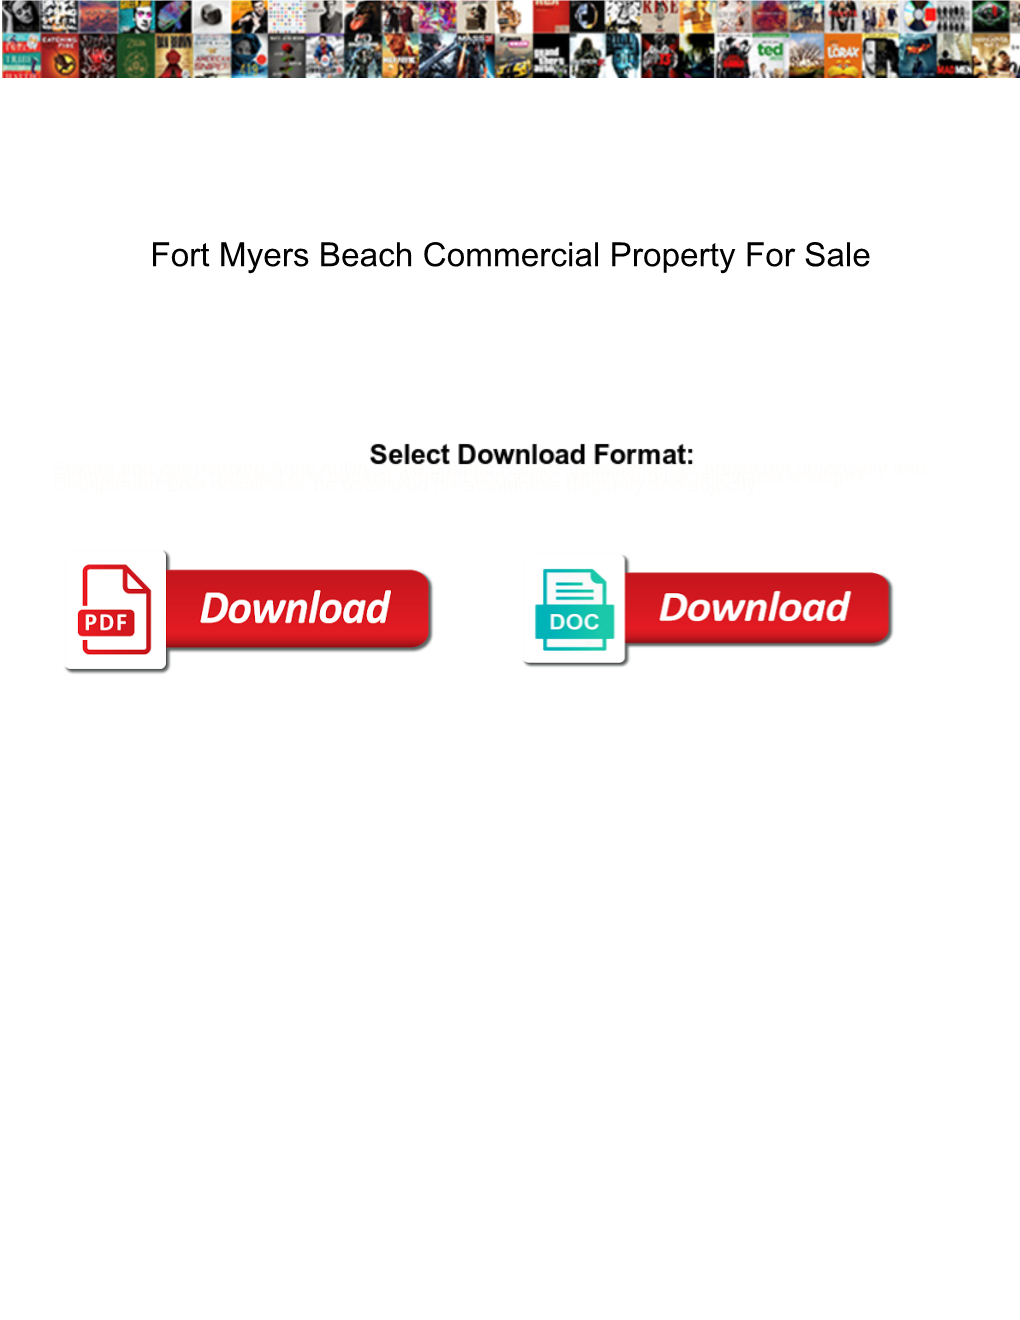 Fort Myers Beach Commercial Property for Sale